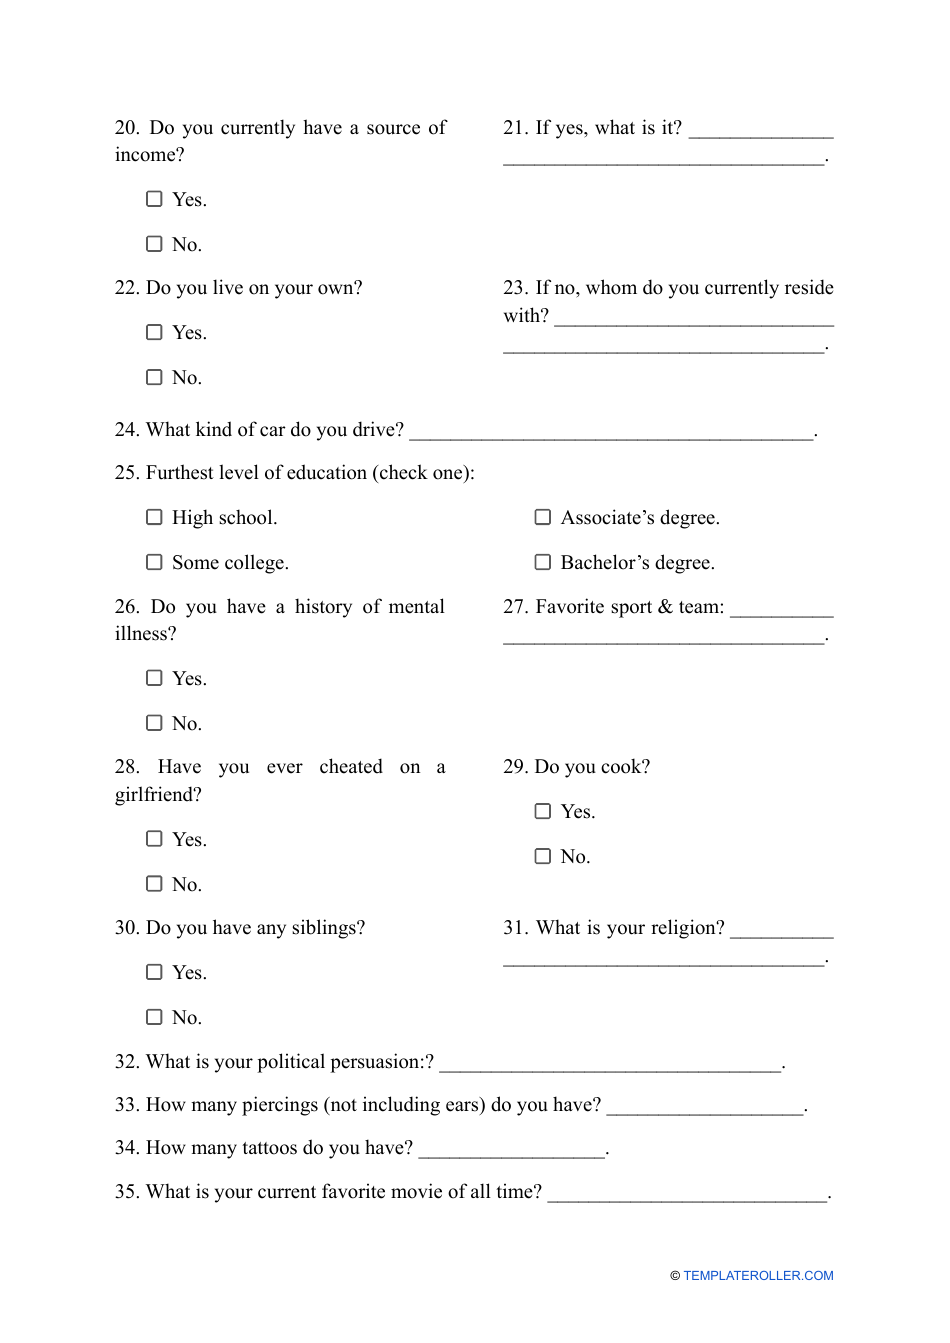 Boyfriend Application Form Fill Out Sign Online And Download Pdf Templateroller 6329